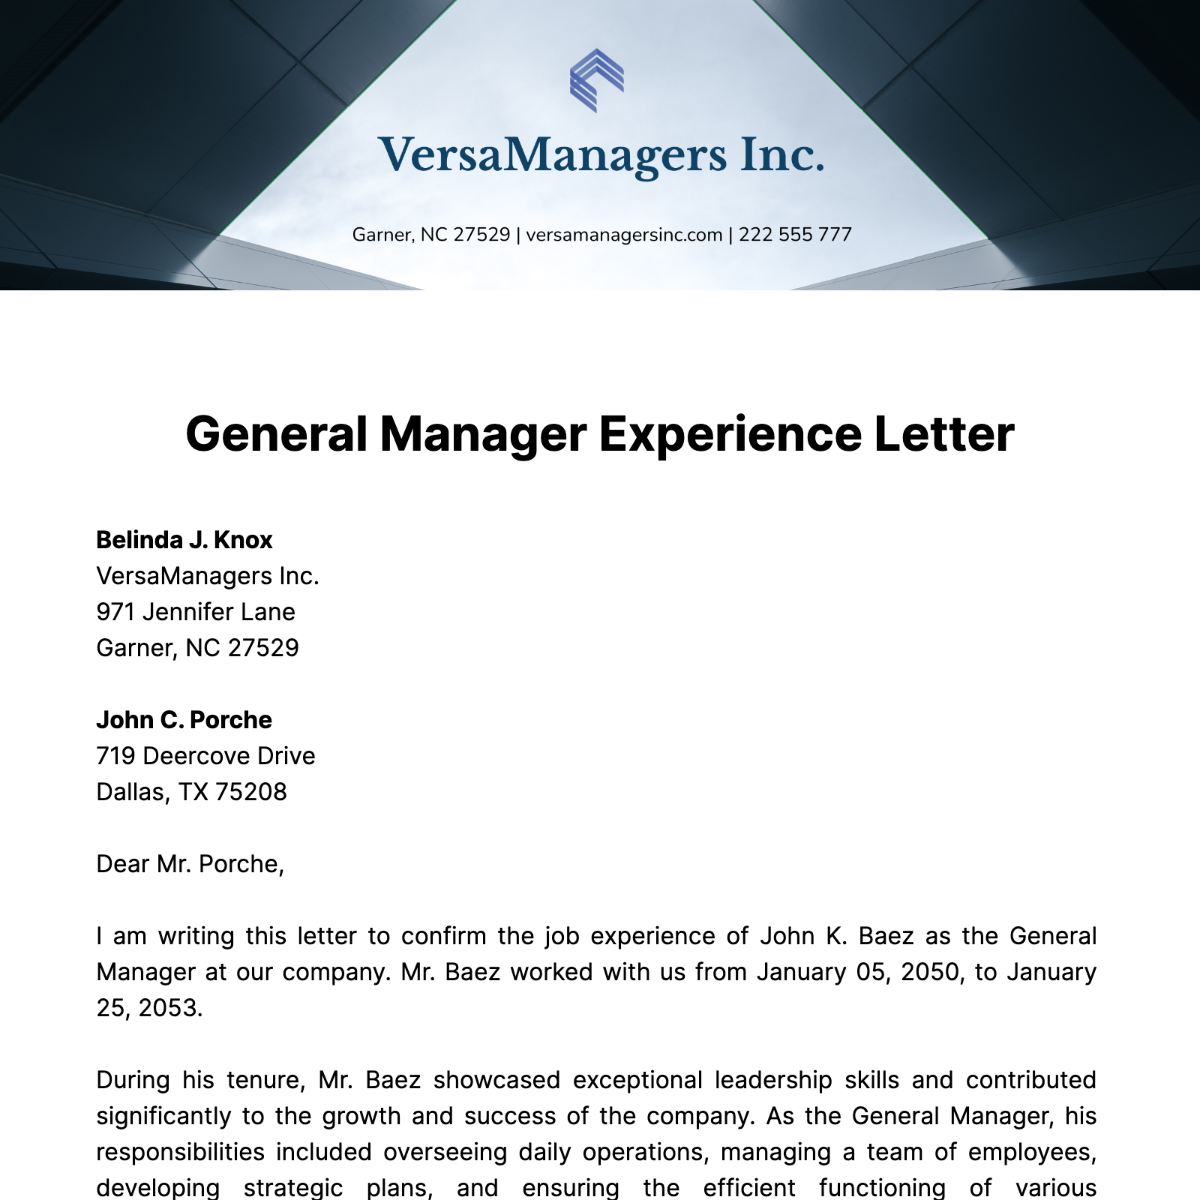 Free General Manager Experience Letter   Template